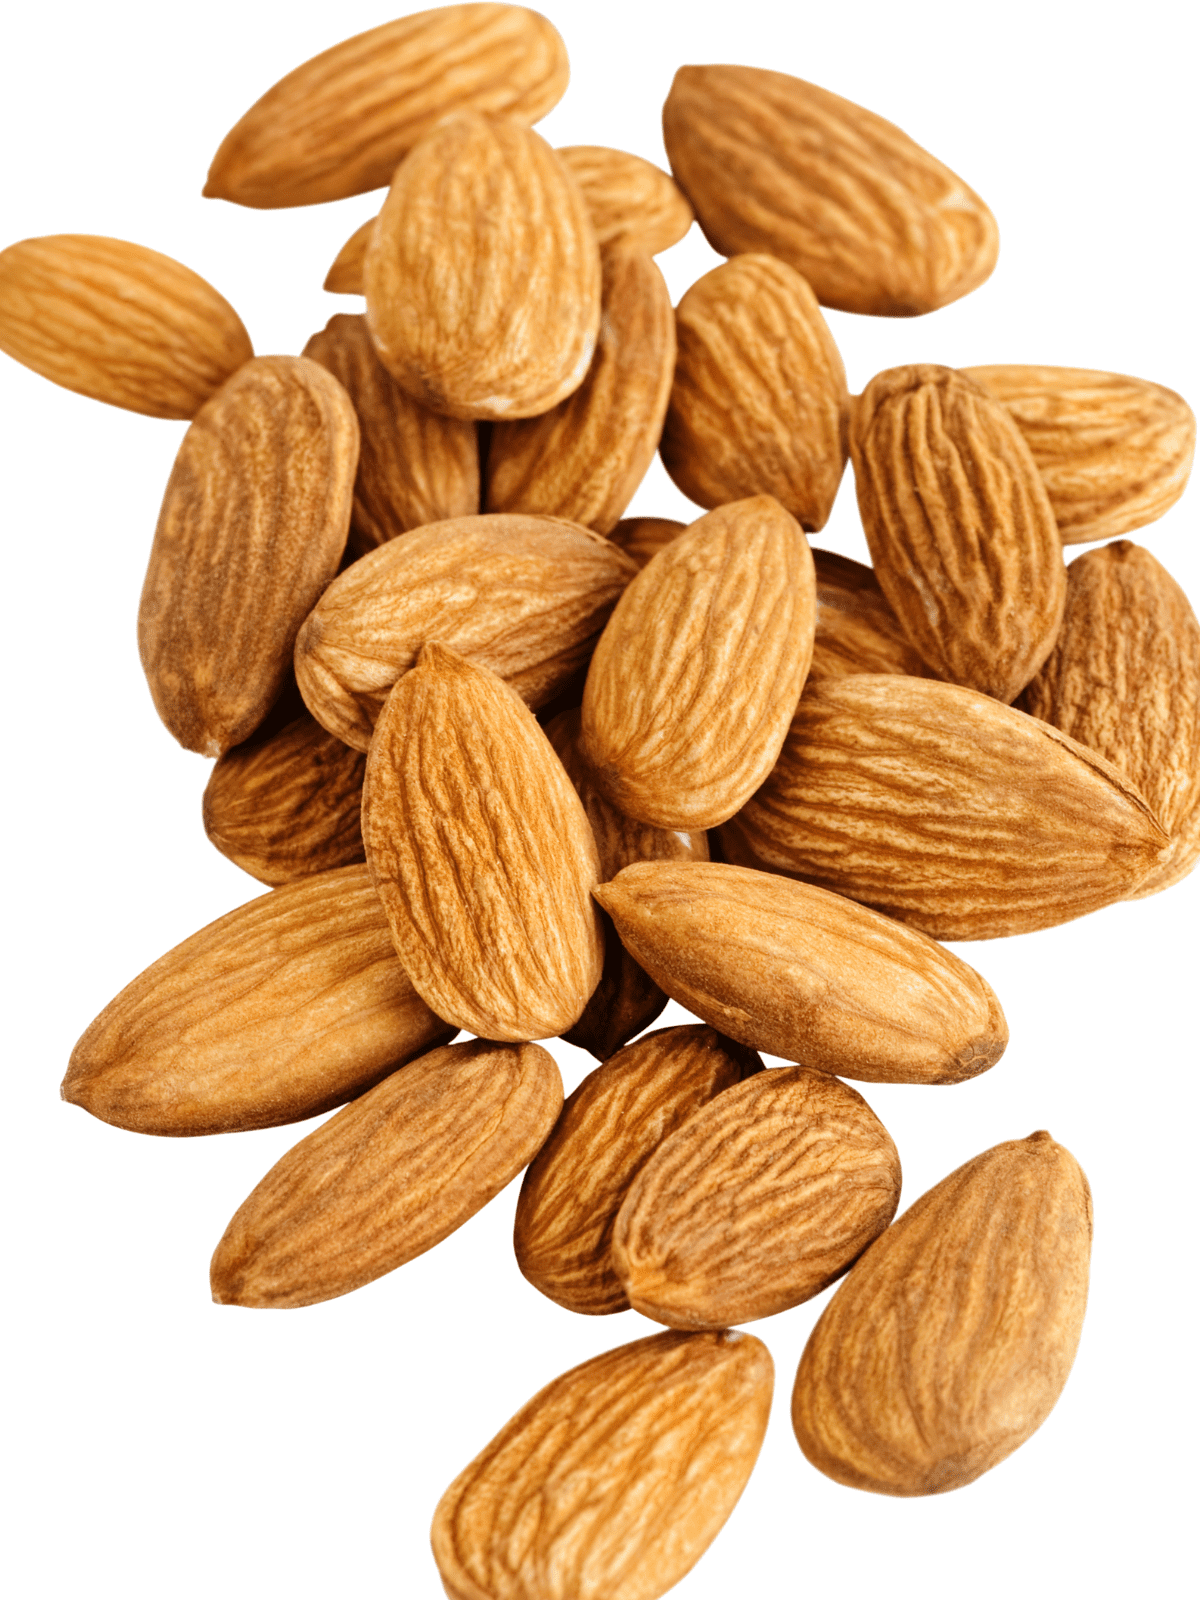 Almonds with a white background.